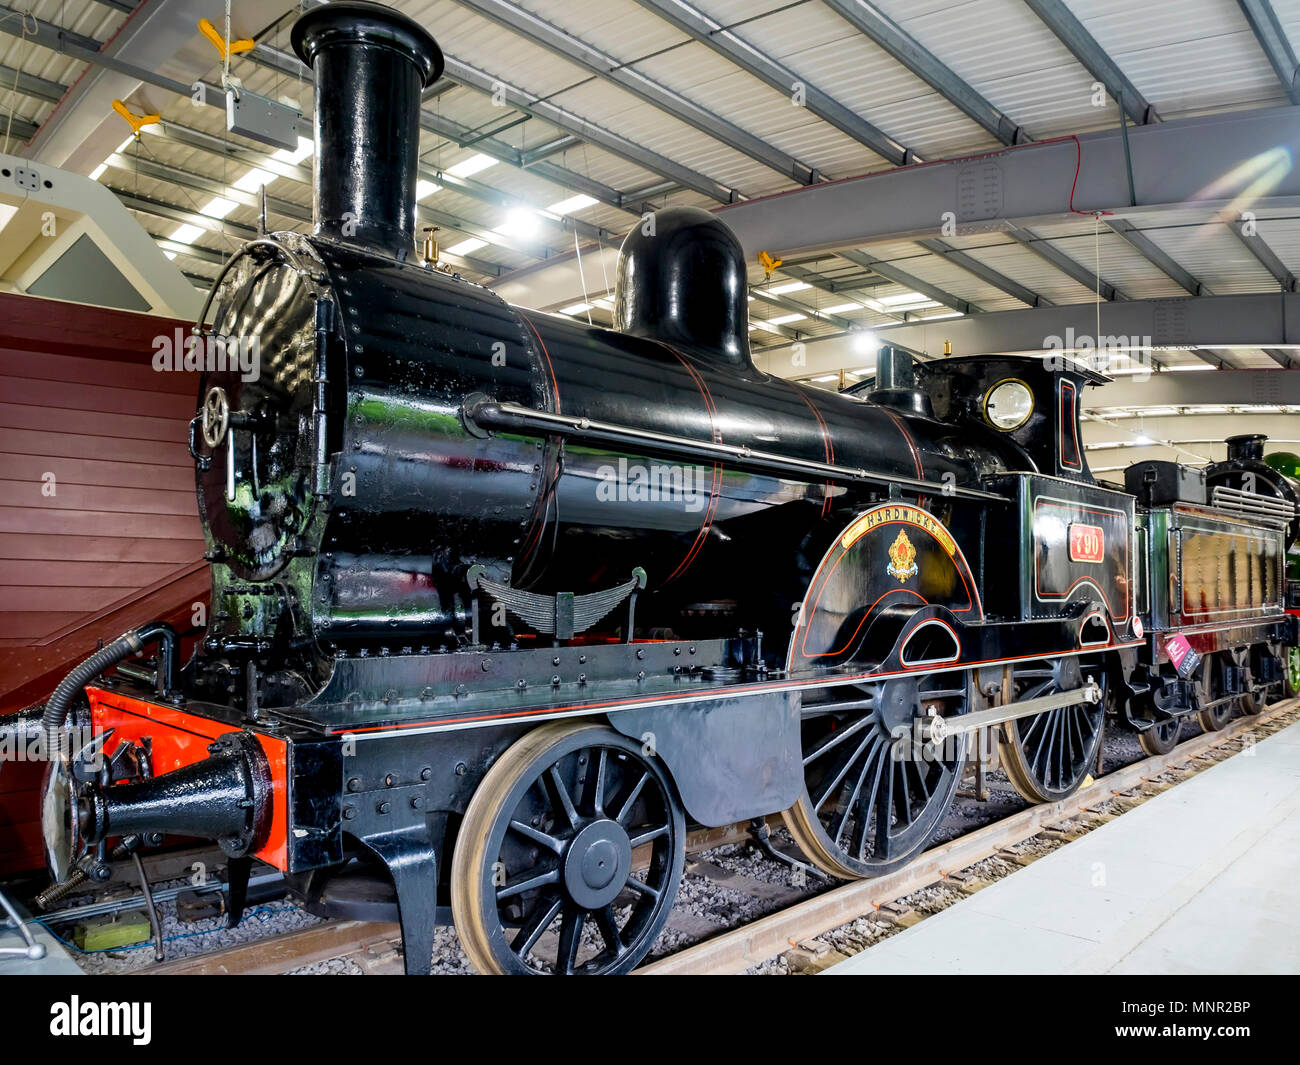 London North Western Railway No. 790 2-4-0 express passenger locomotive built Crewe  1873 on display in the Museum at Shildon Stock Photo